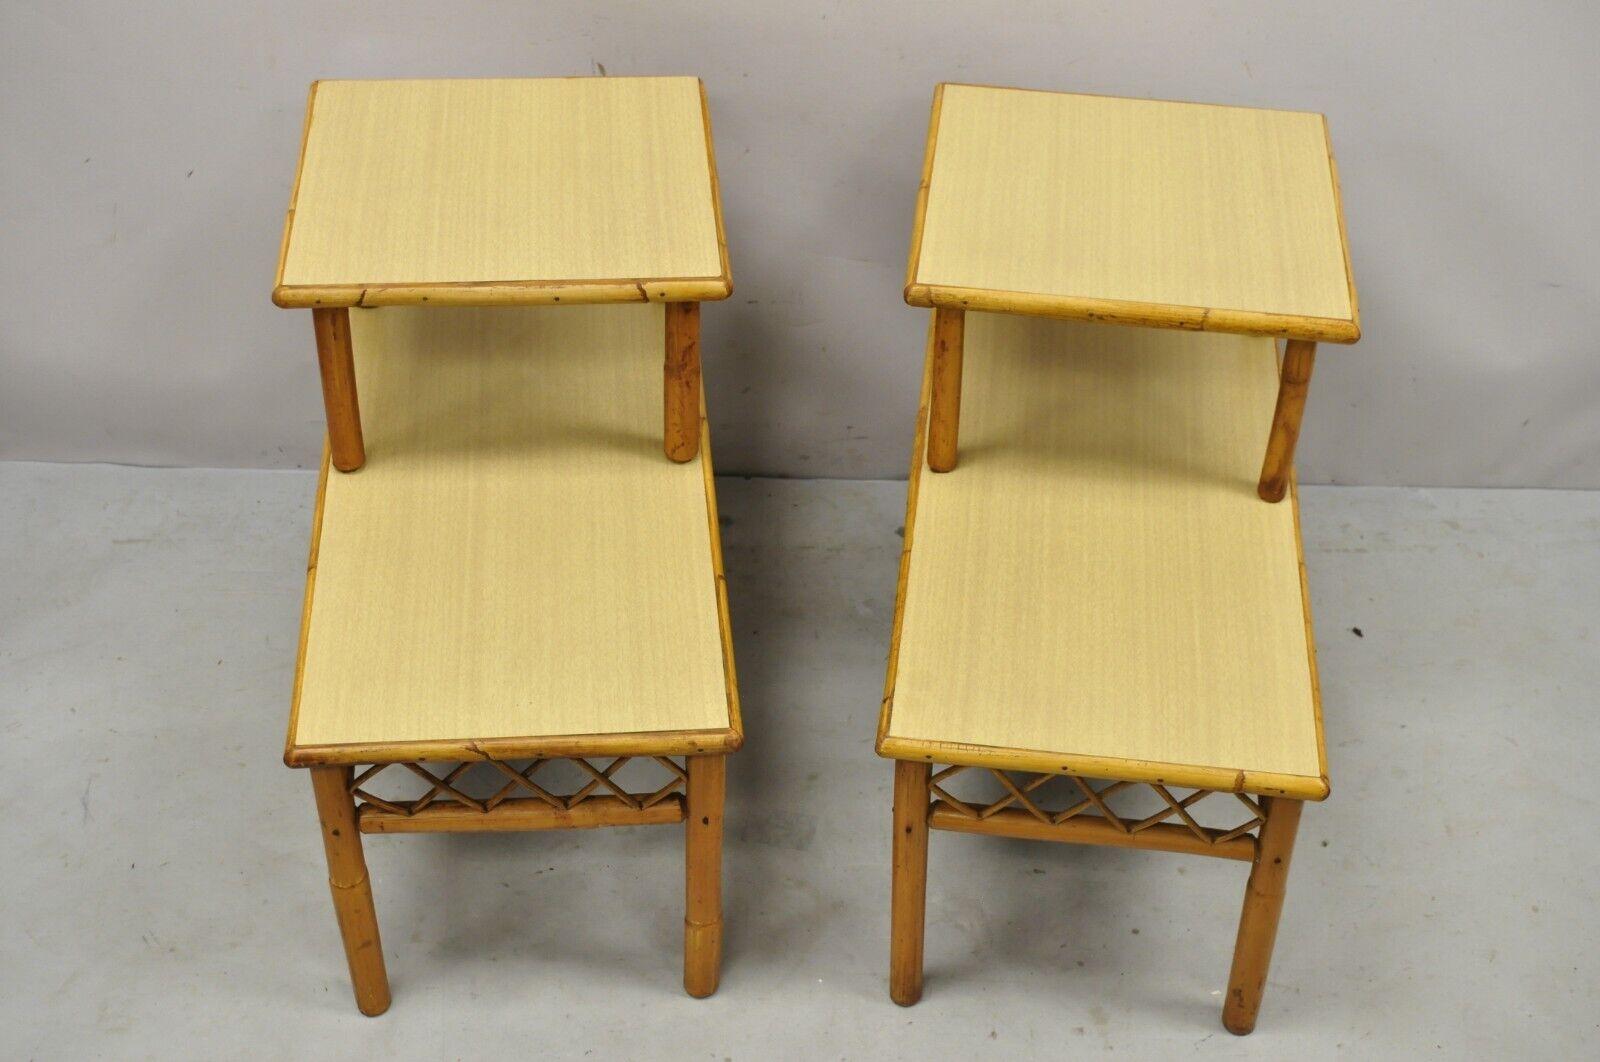 Laminated Vintage Tiki Rattan Midcentury Bamboo Step Up End Tables, a Pair For Sale